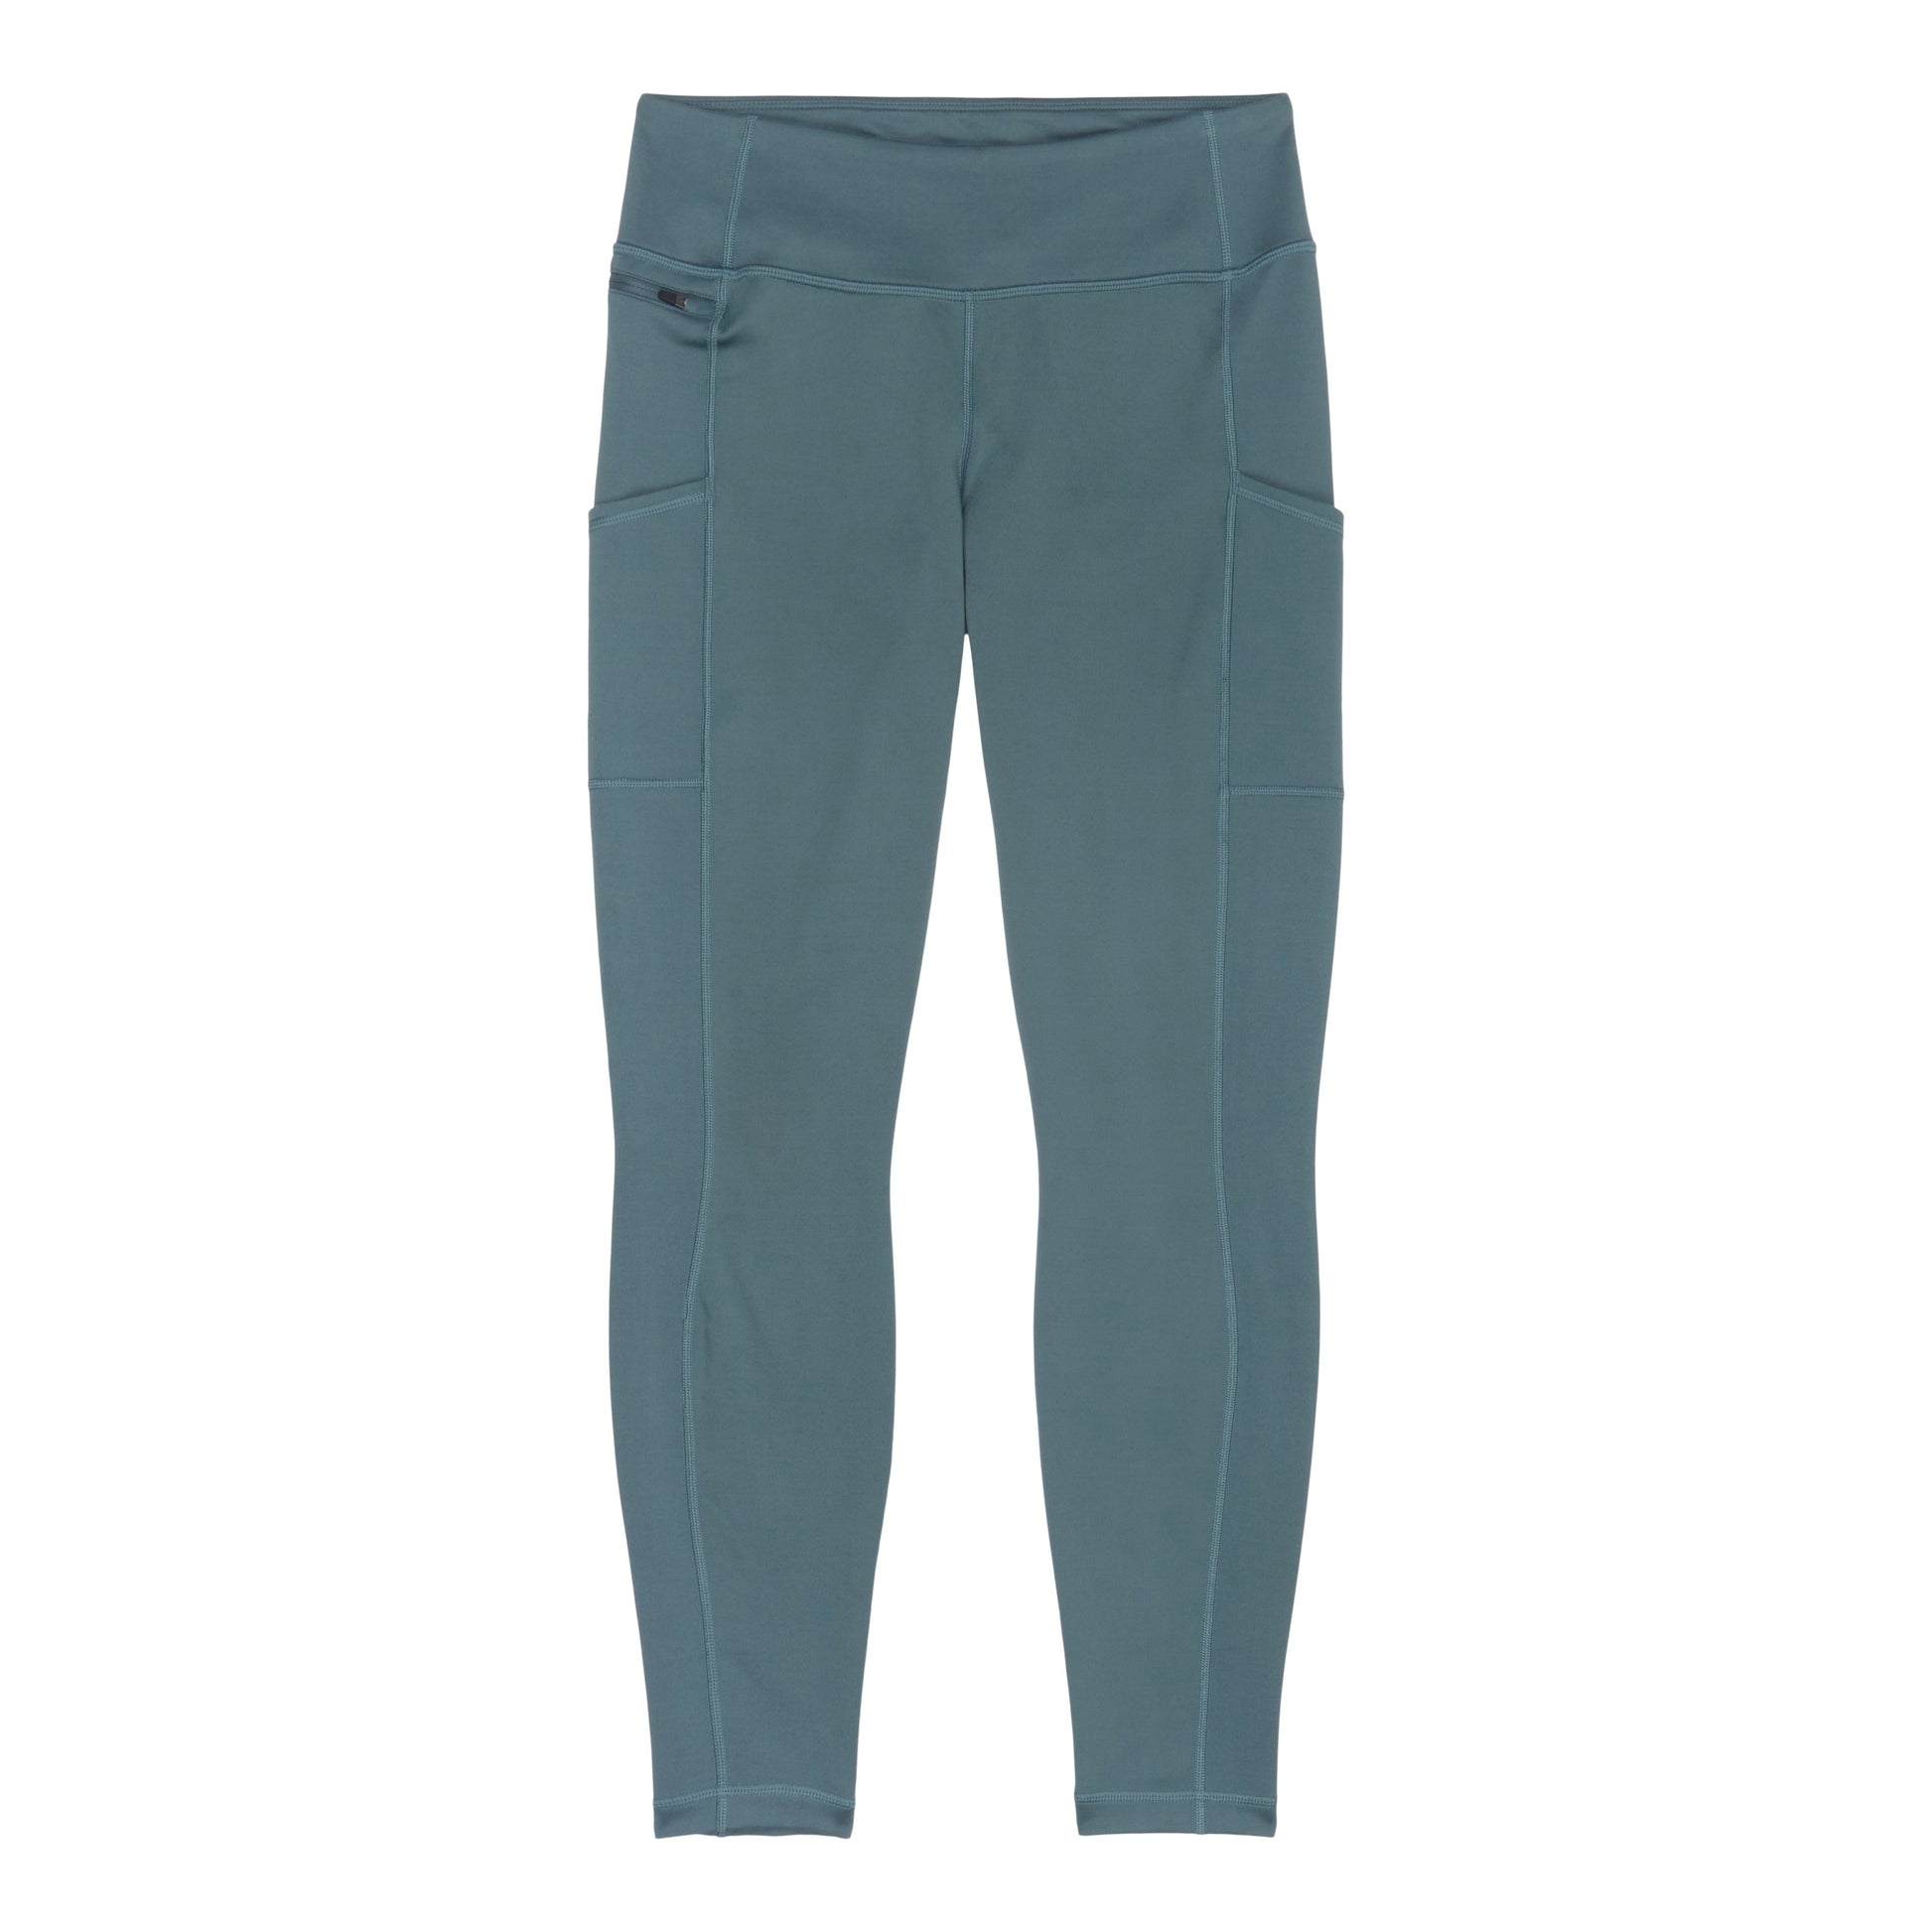 Patagonia Women's Pack Out Tights in Tidepool Blue